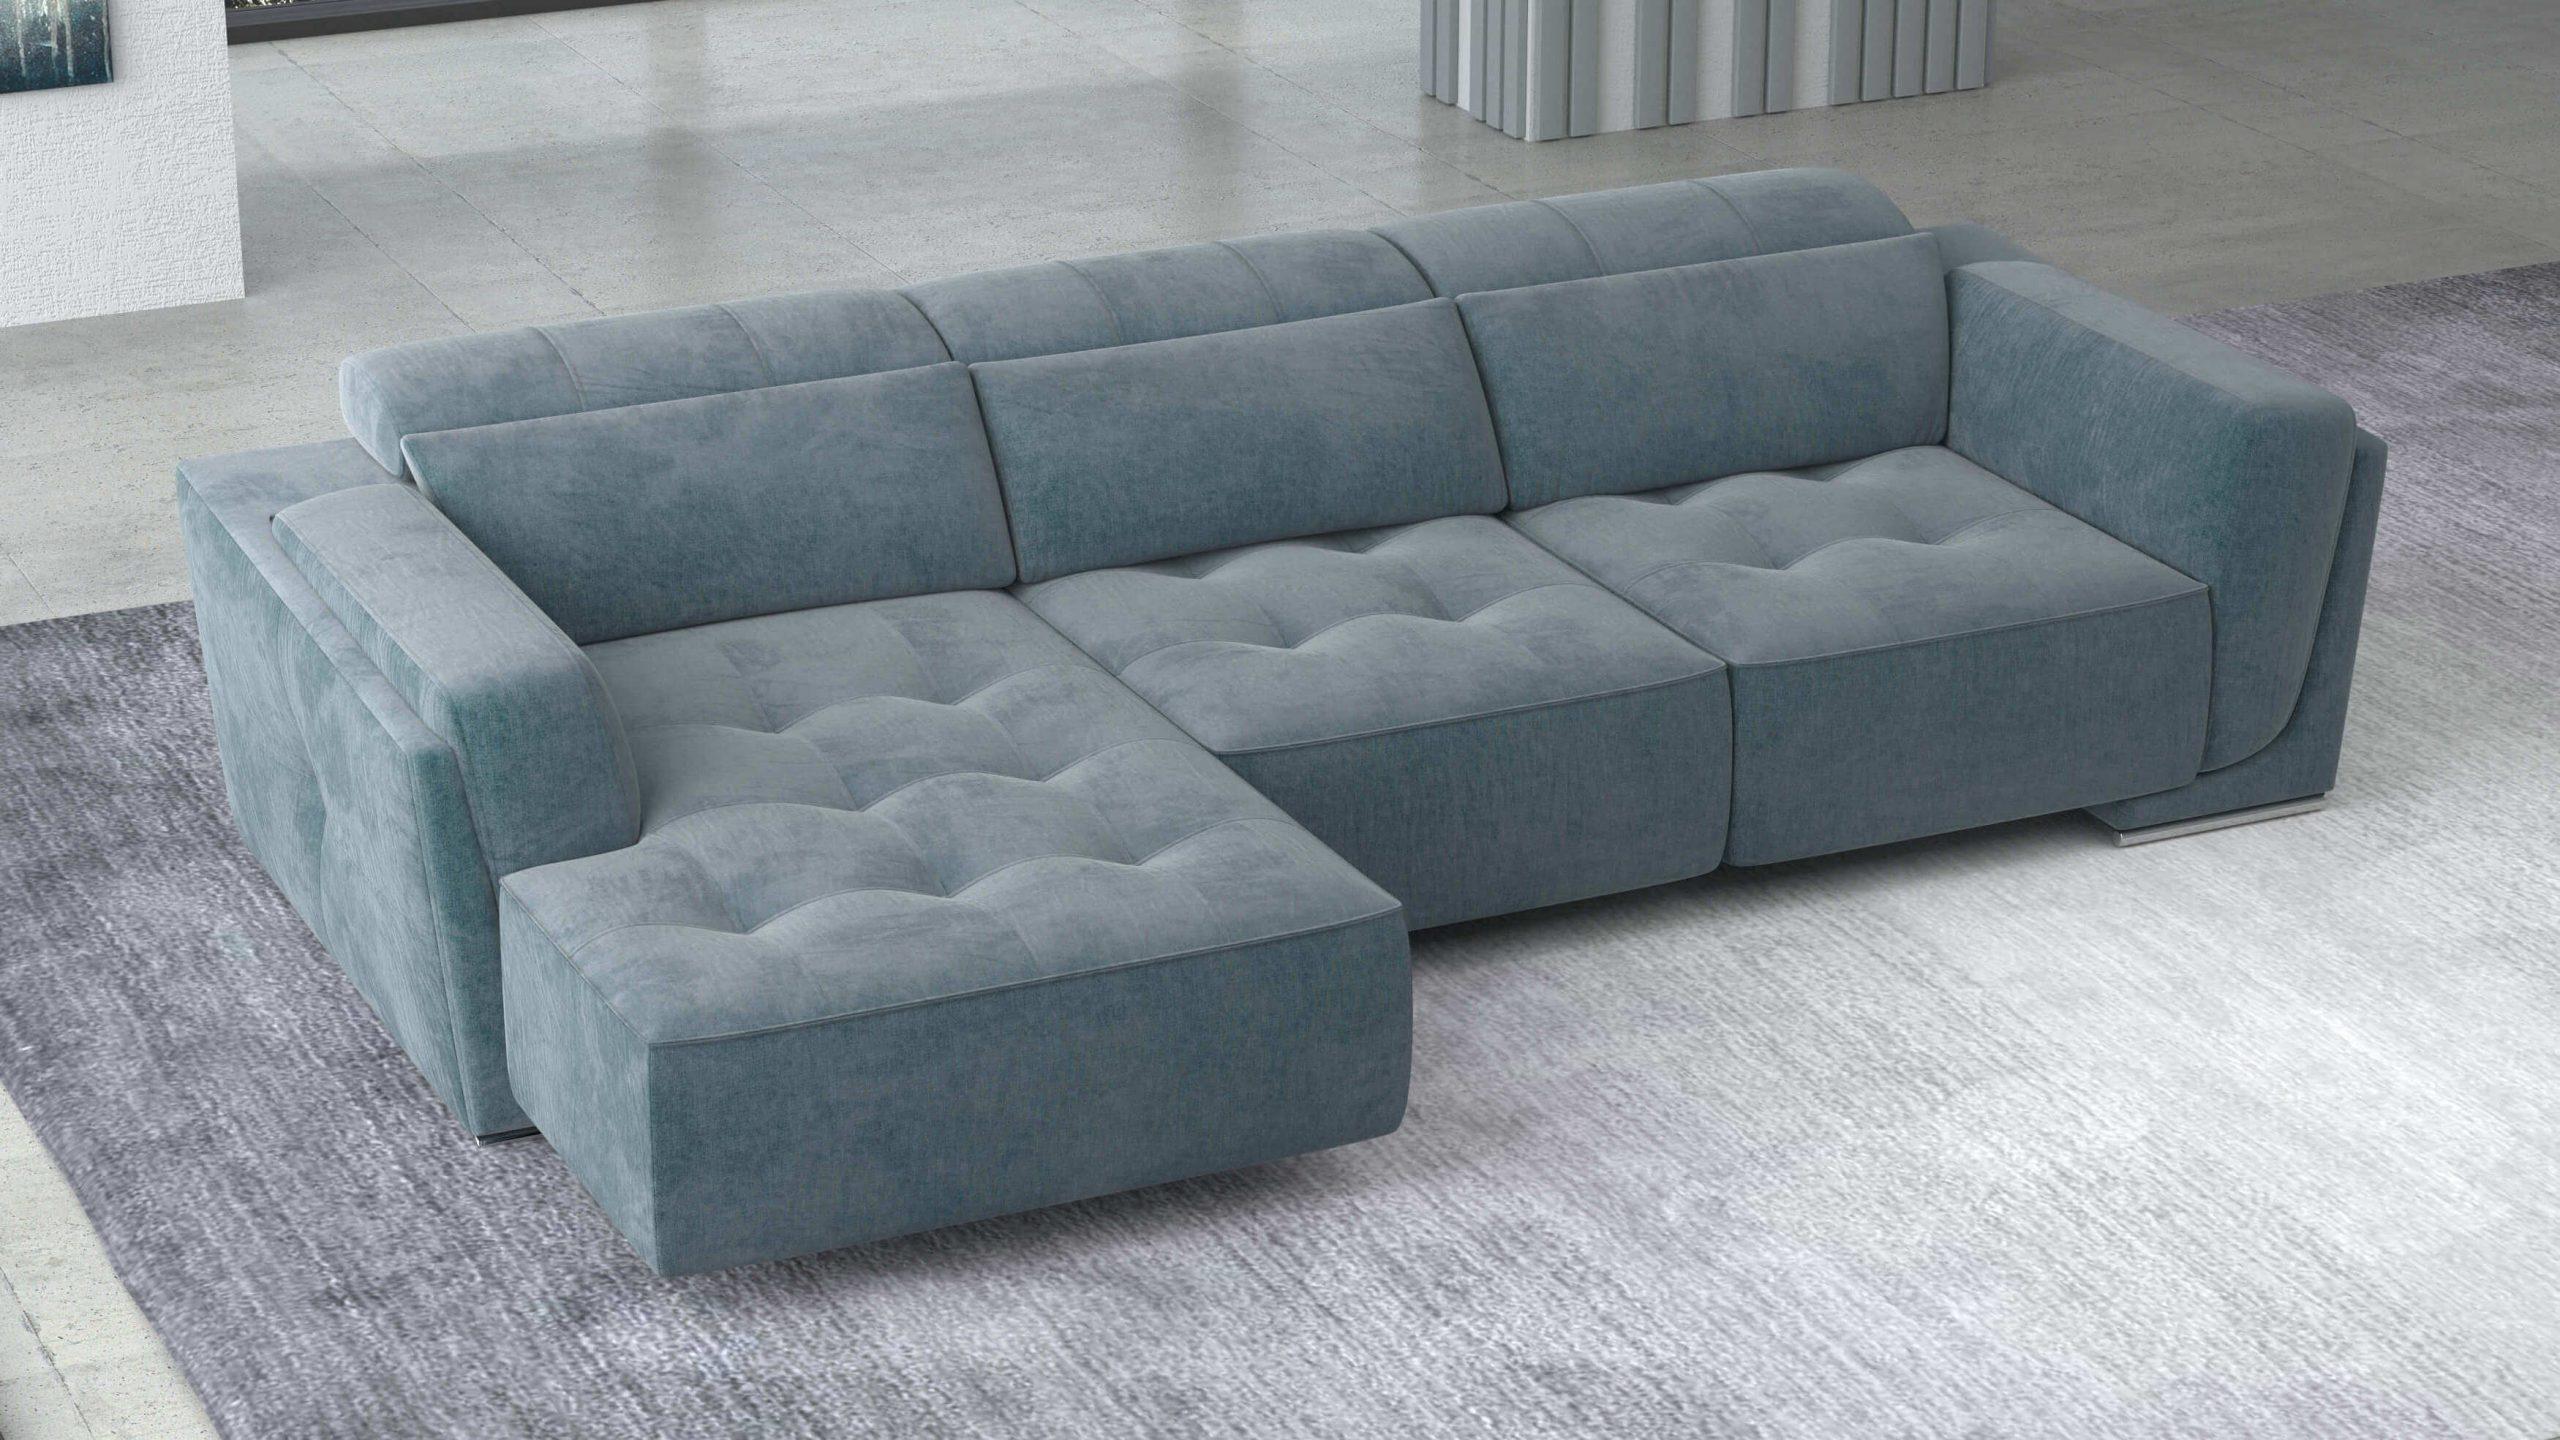 

    
Bilbao-Blue-Sectional-Sofa-LC Contemporary Midnight Blue Wood Sectional Sofa Left Chaise Modekraft Bilbao Bilbao-Blue-Sectional-Sofa-LC
